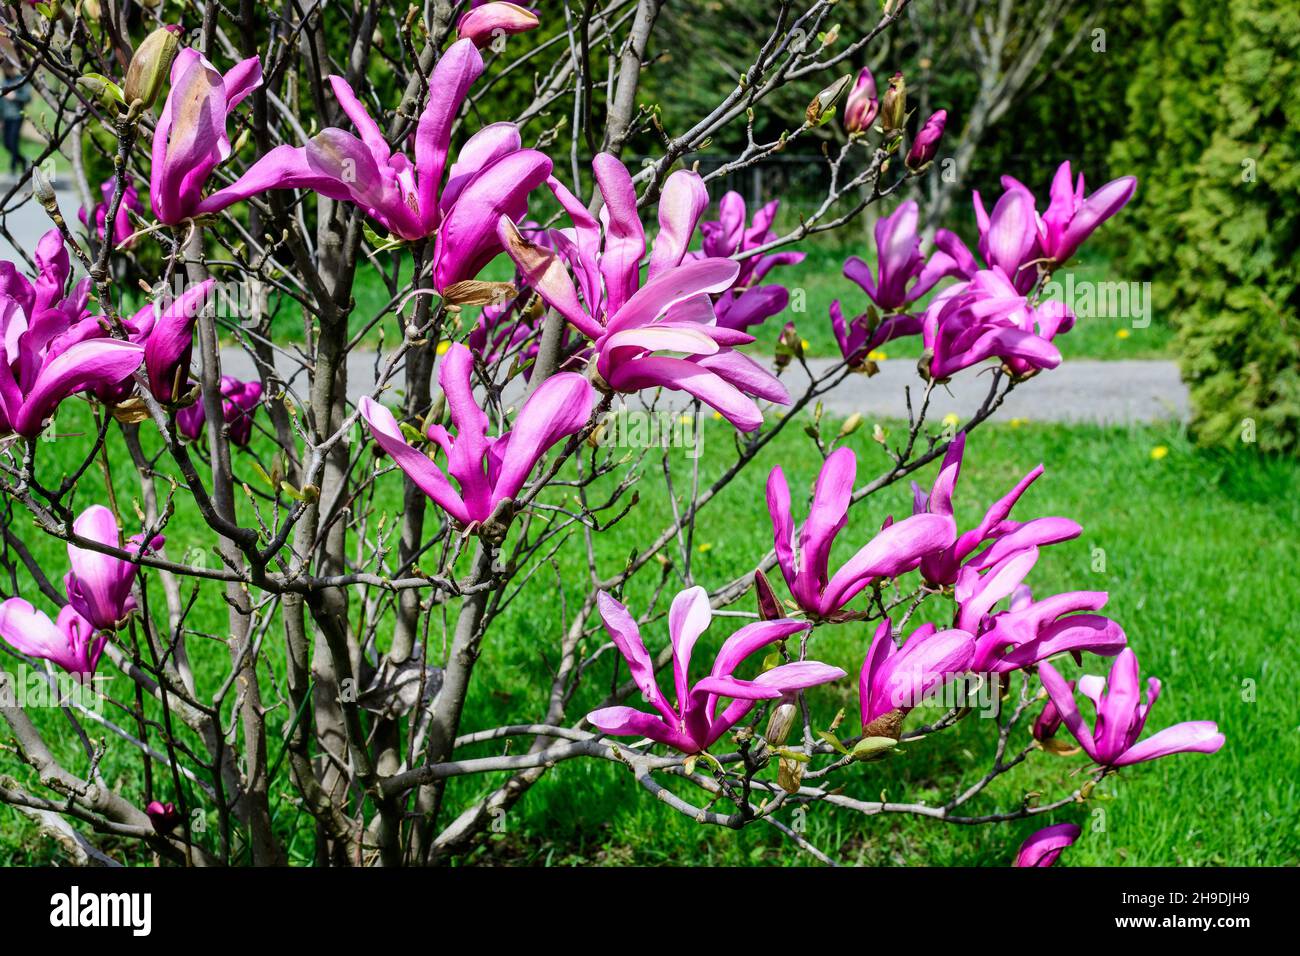 Many delicate vivid pink magnolia flowers in full bloom on a branch in a garden in a sunny spring day, beautiful outdoor floral background photographe Stock Photo